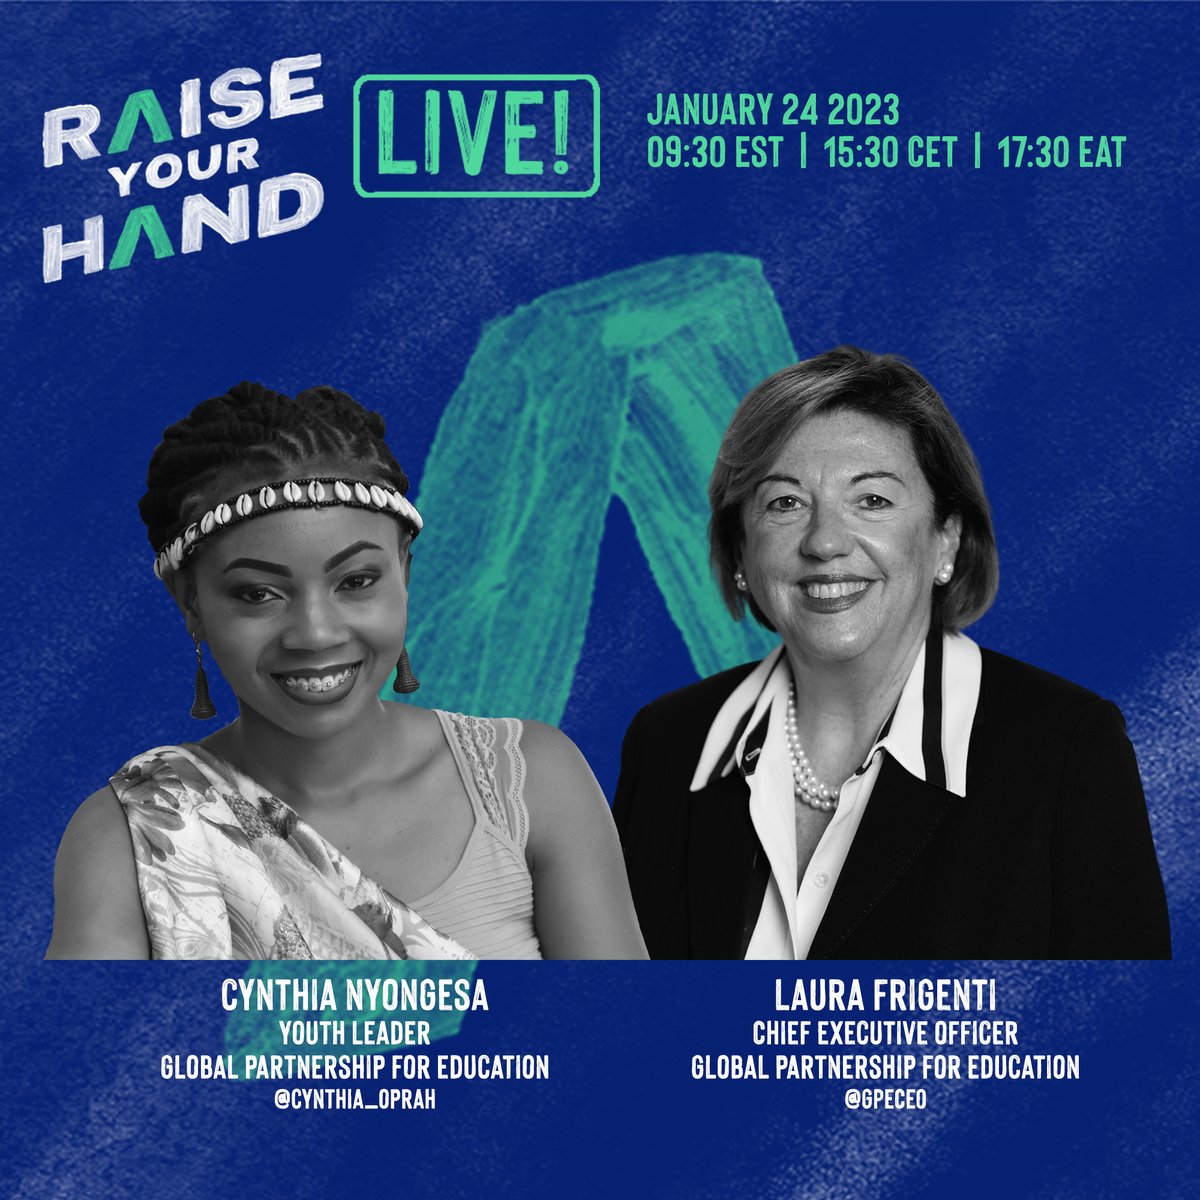 How do we:
🔹 tackle the learning crisis?
🔹 keep education a 🌍 priority?

Join the discussion tomorrow at @GPforEducation #RaiseYourHand Live! ft. @GPECEO and @Cynthia_Oprah on #EducationDay

twitter.com/i/broadcasts/1…